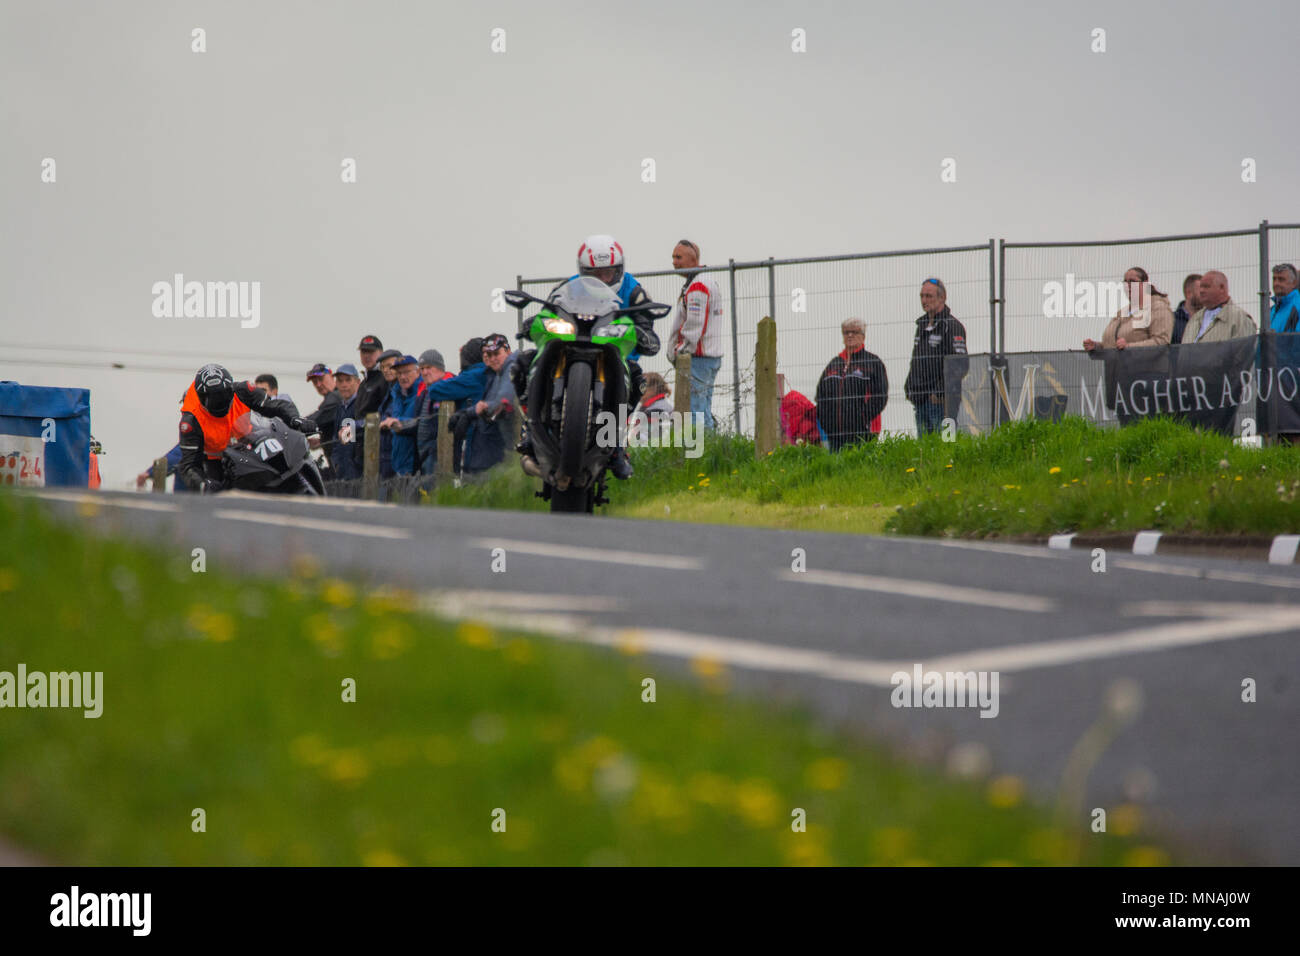 Portrush Northern Ireland. Tuesday 15th May 2018.  Race Practice for NW 200. Paul Mackey No 70 makes his debut on the course. He must wear an orange bib to warn other riders of his inexpereience. In this session he is following a more experienced rider to learn the course. Credit: Brian Wilkinson/Alamy Live News Stock Photo